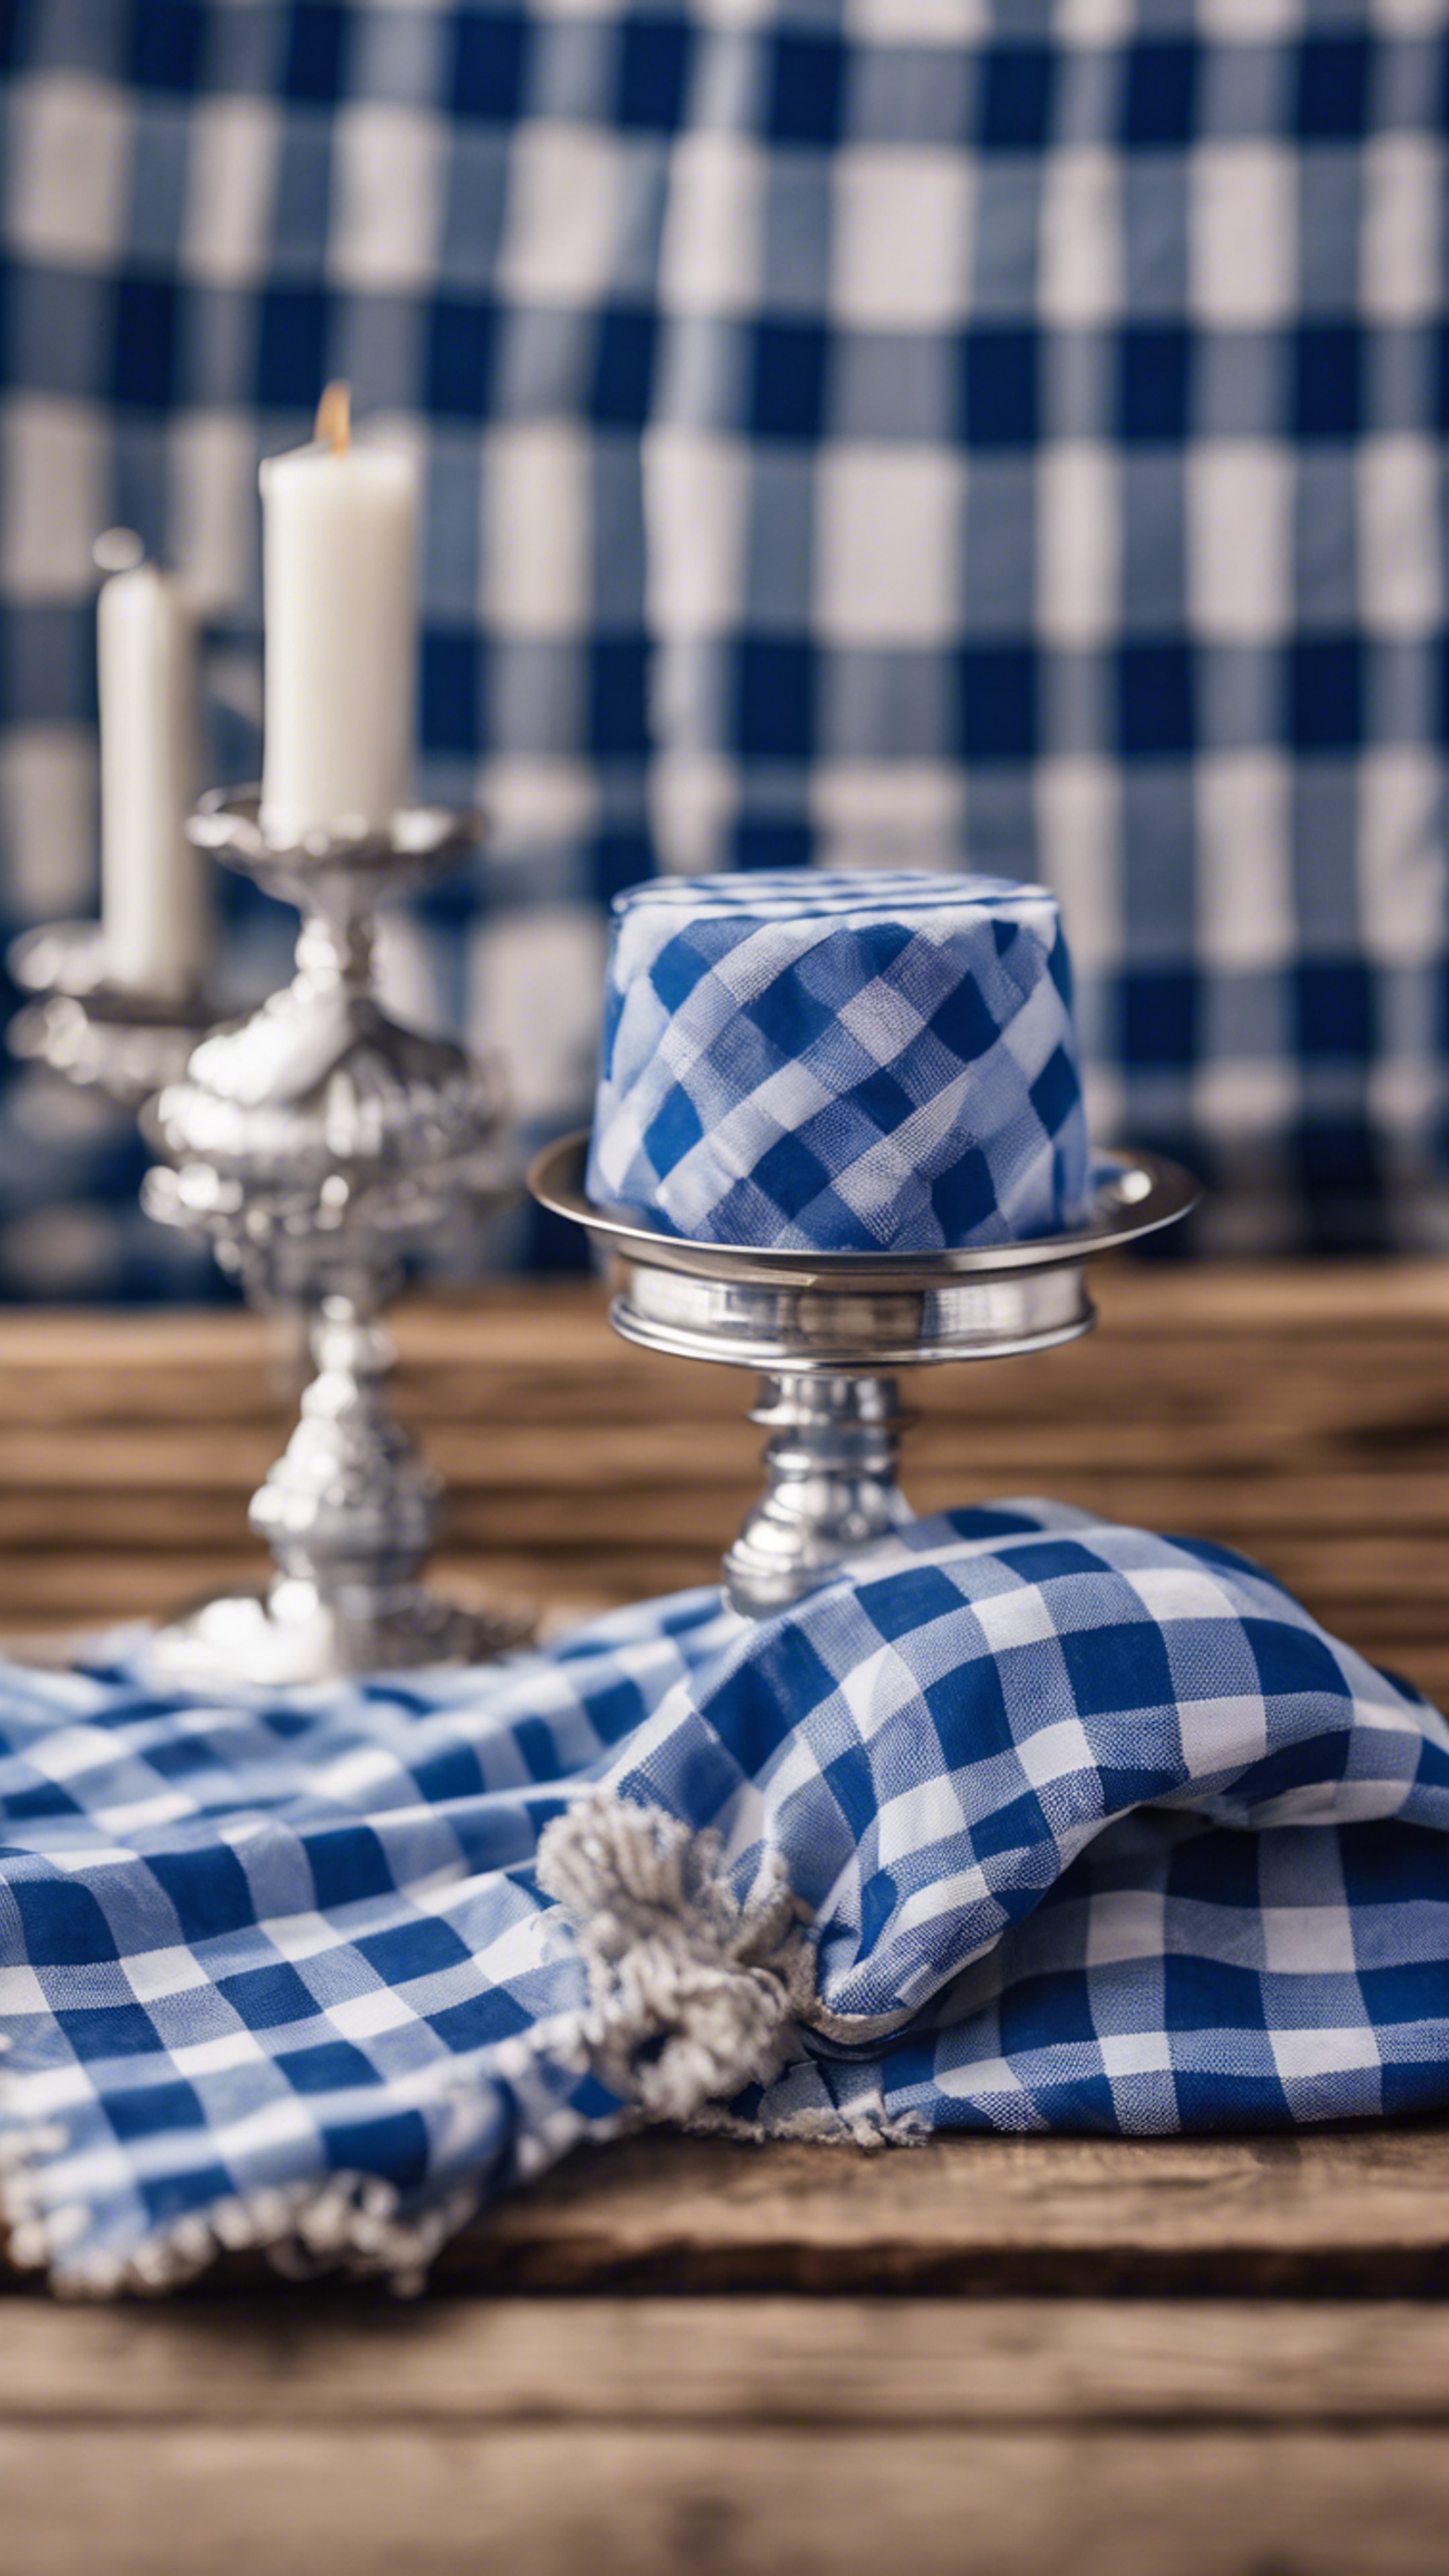 Classic blue checkered gingham fabric draped over a wooden table with a silver candelabra, evoking a preppy picnic scene. Tapet[5483729deeeb4e2a9f91]